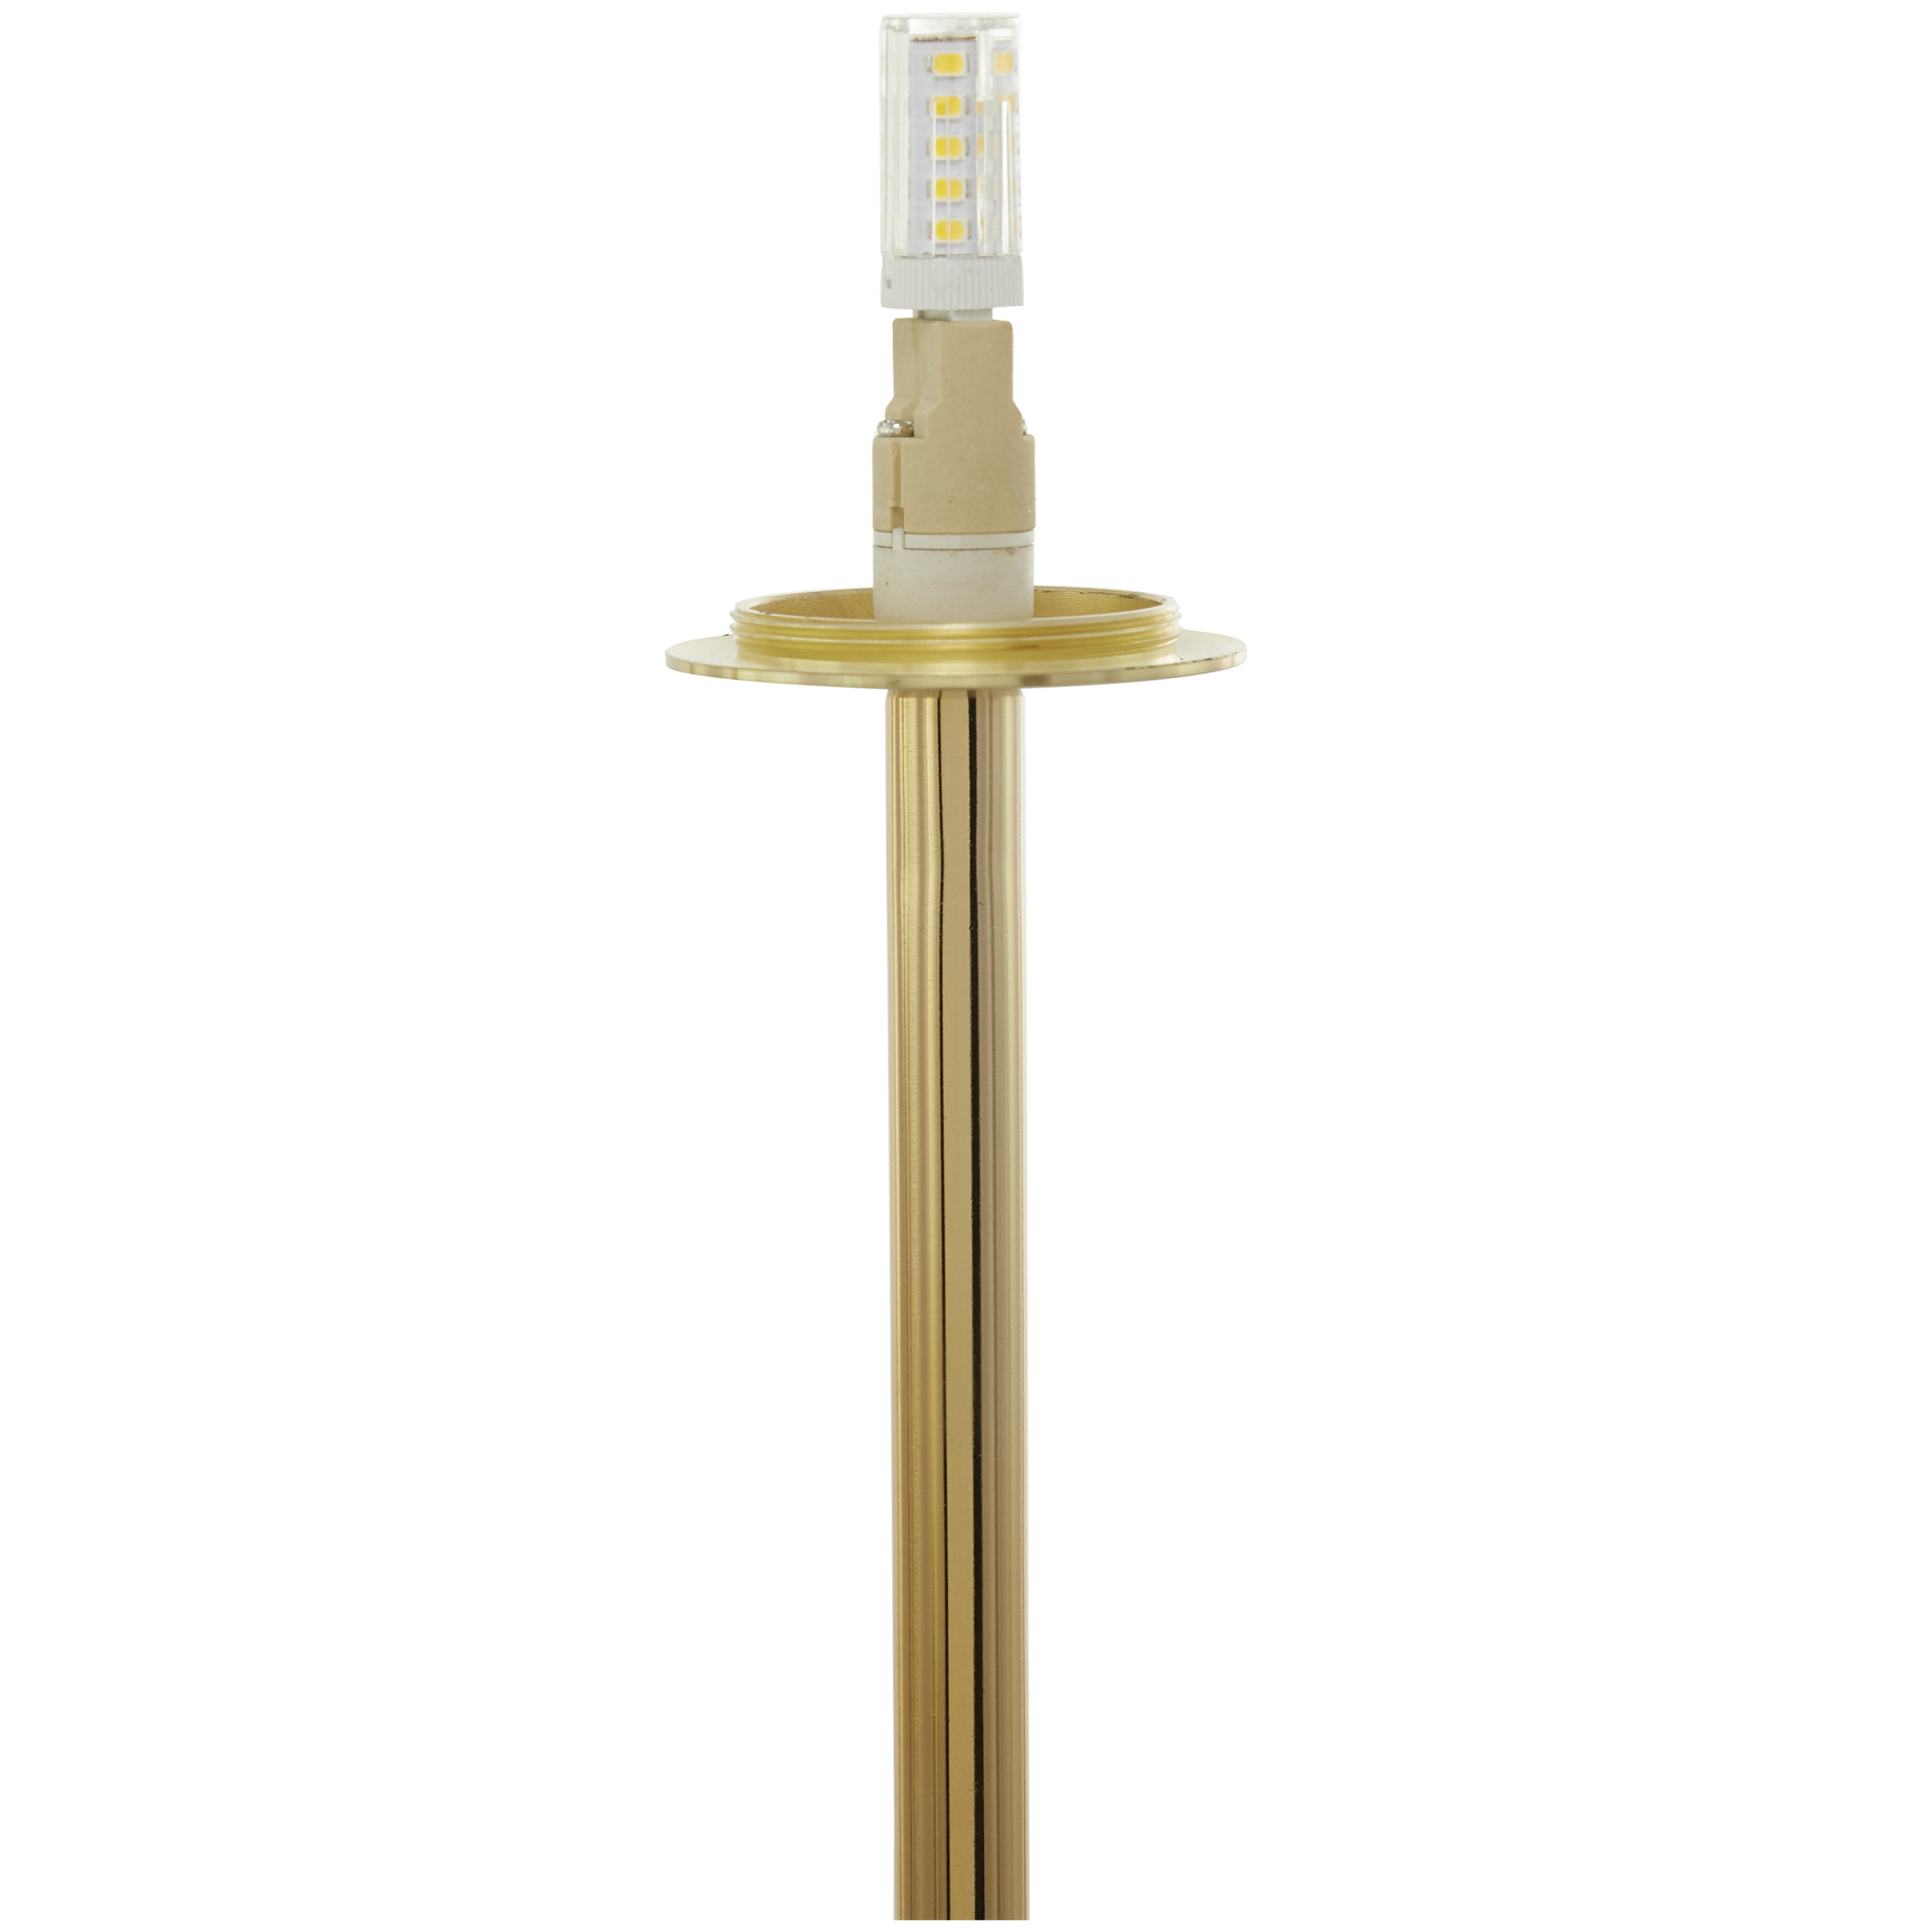 DecMode 73" 2 Light Orb Gold Floor Lamp with White Glass Shade - image 5 of 9